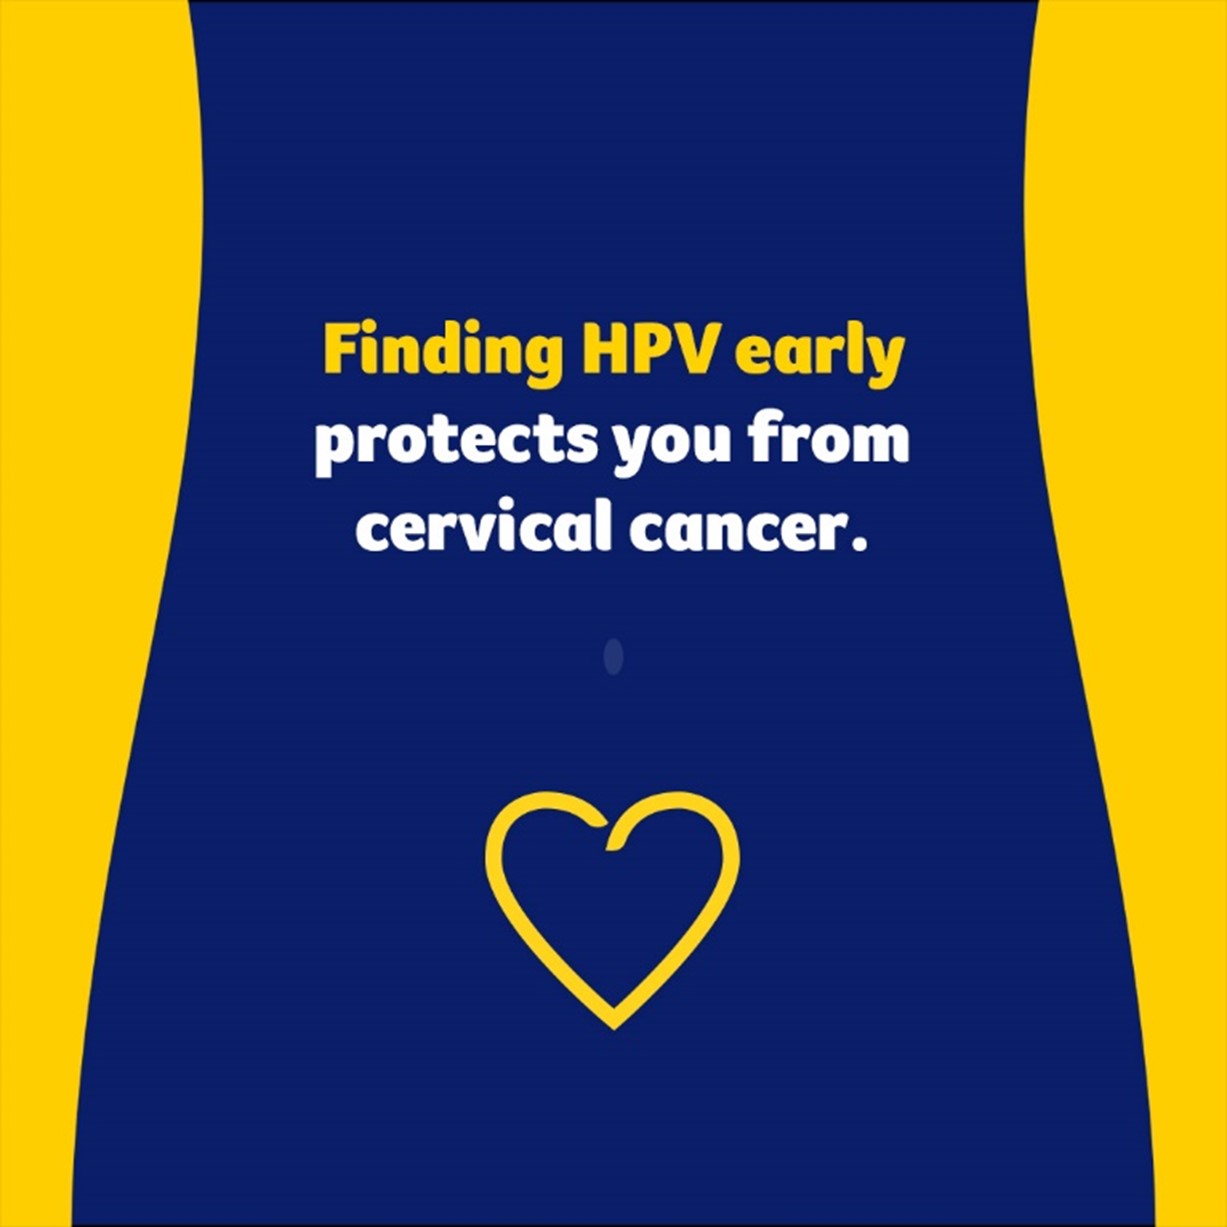 Finding HPV early protects you from cervical cancer